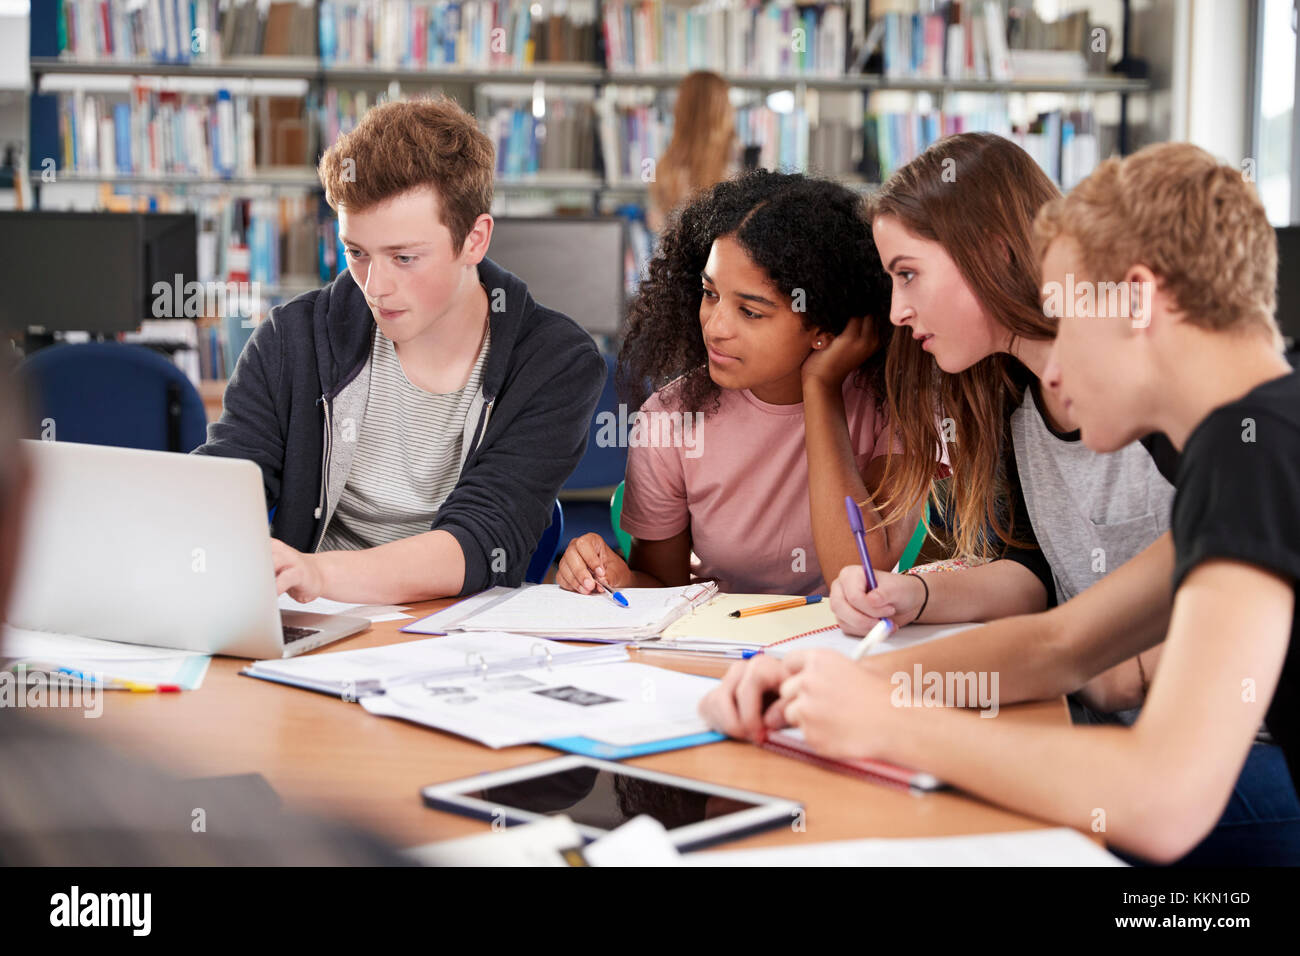 Group Of College Students Collaborating On Project In Library Stock Photo